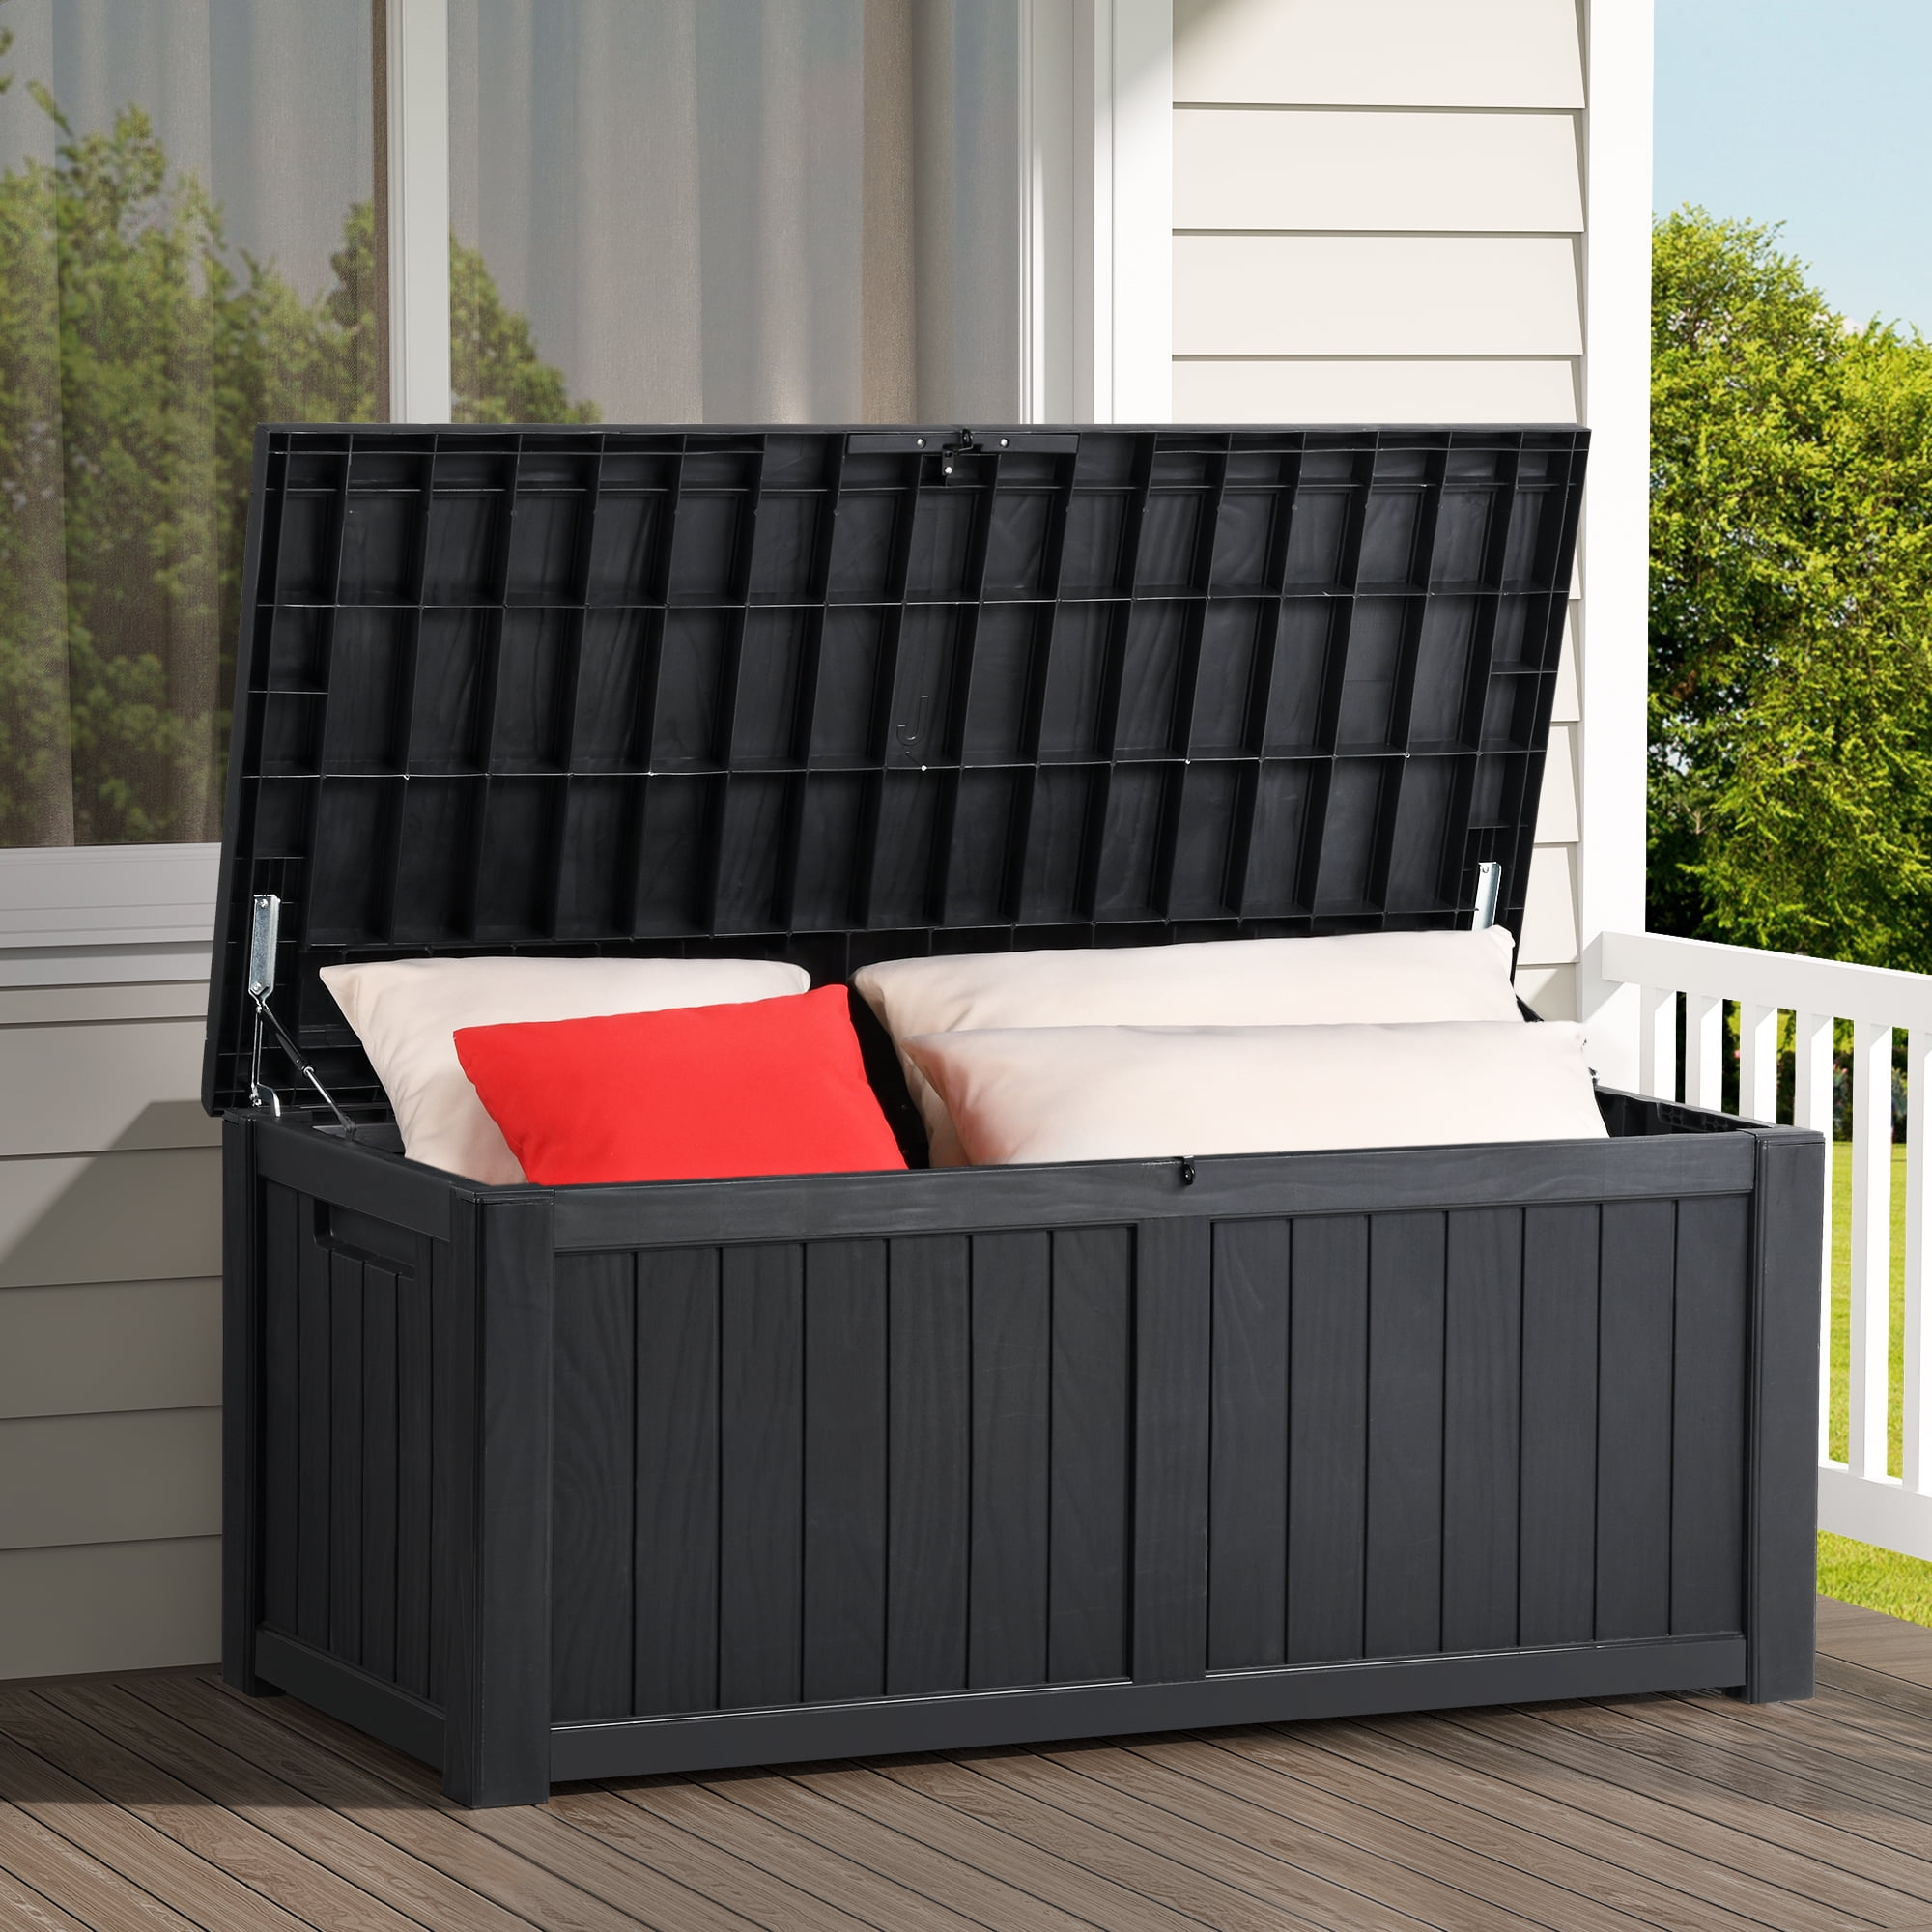 YITAHOME Dextrus 120 Gallon Spacious Outdoor Storage Deck Box, Premium Resin Container for Outdoor Cushions, Landscaping Equipment, and Pool